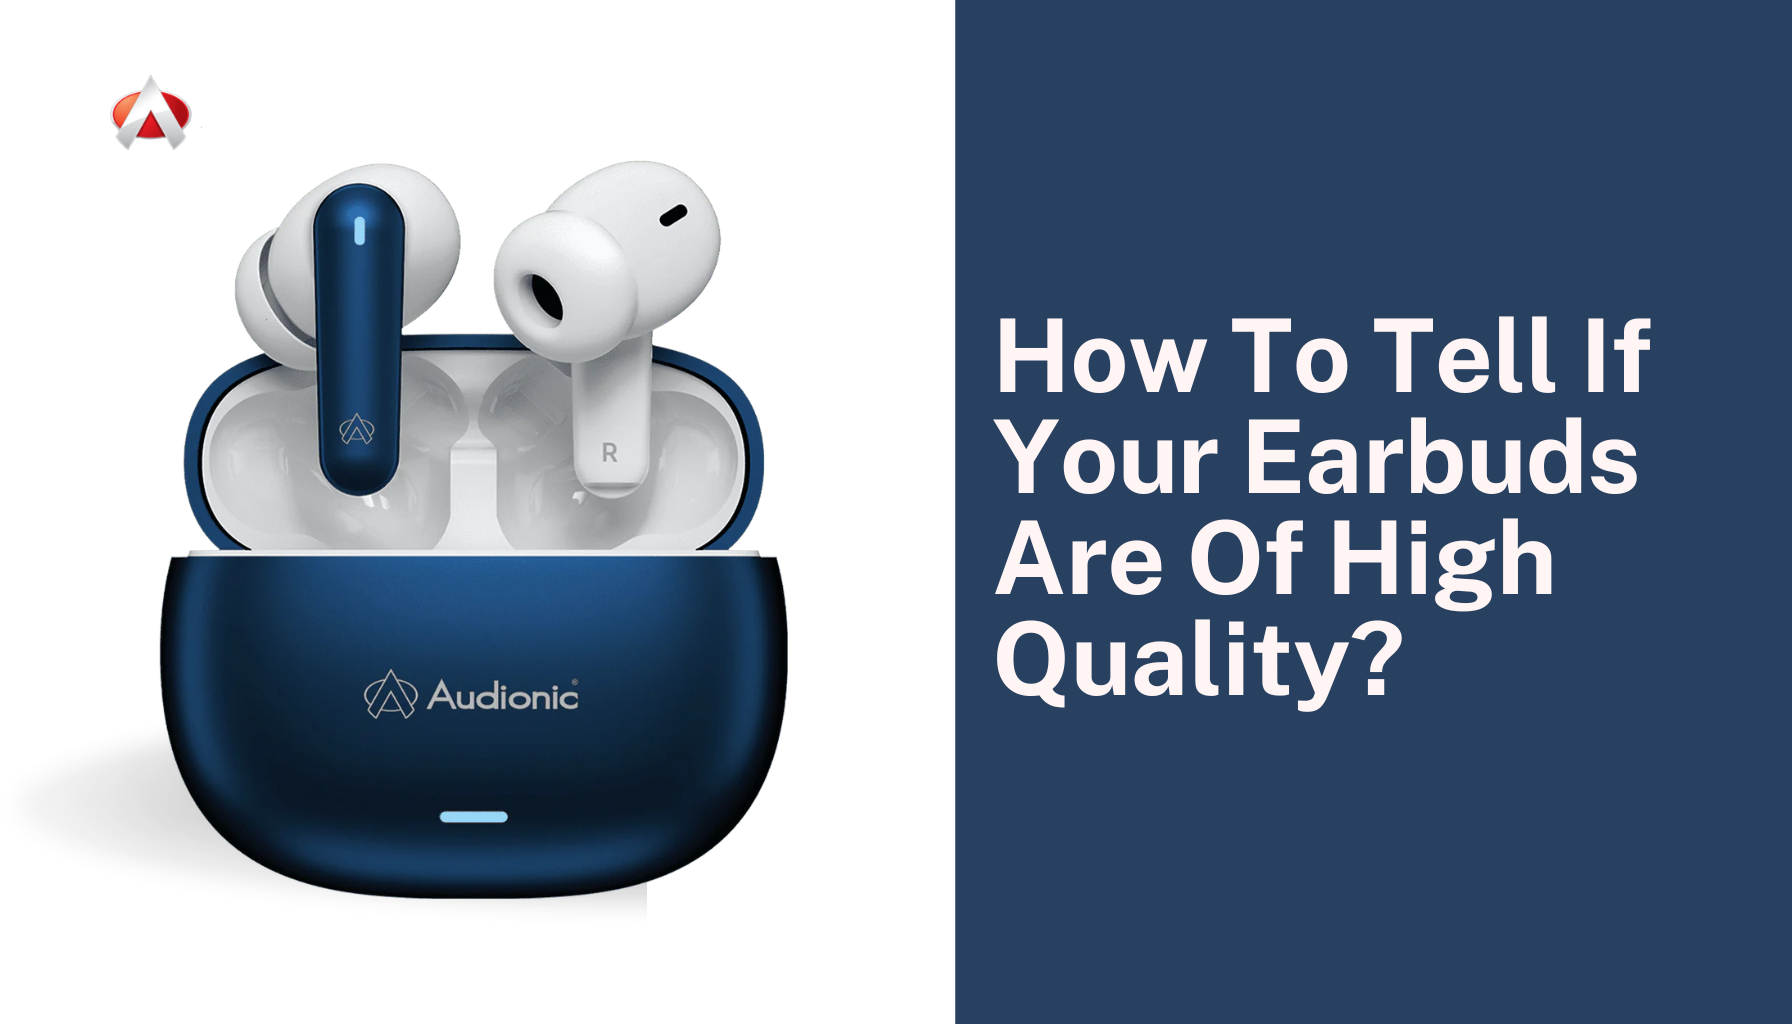 How To Tell If Your Earbuds Are Of High Quality?